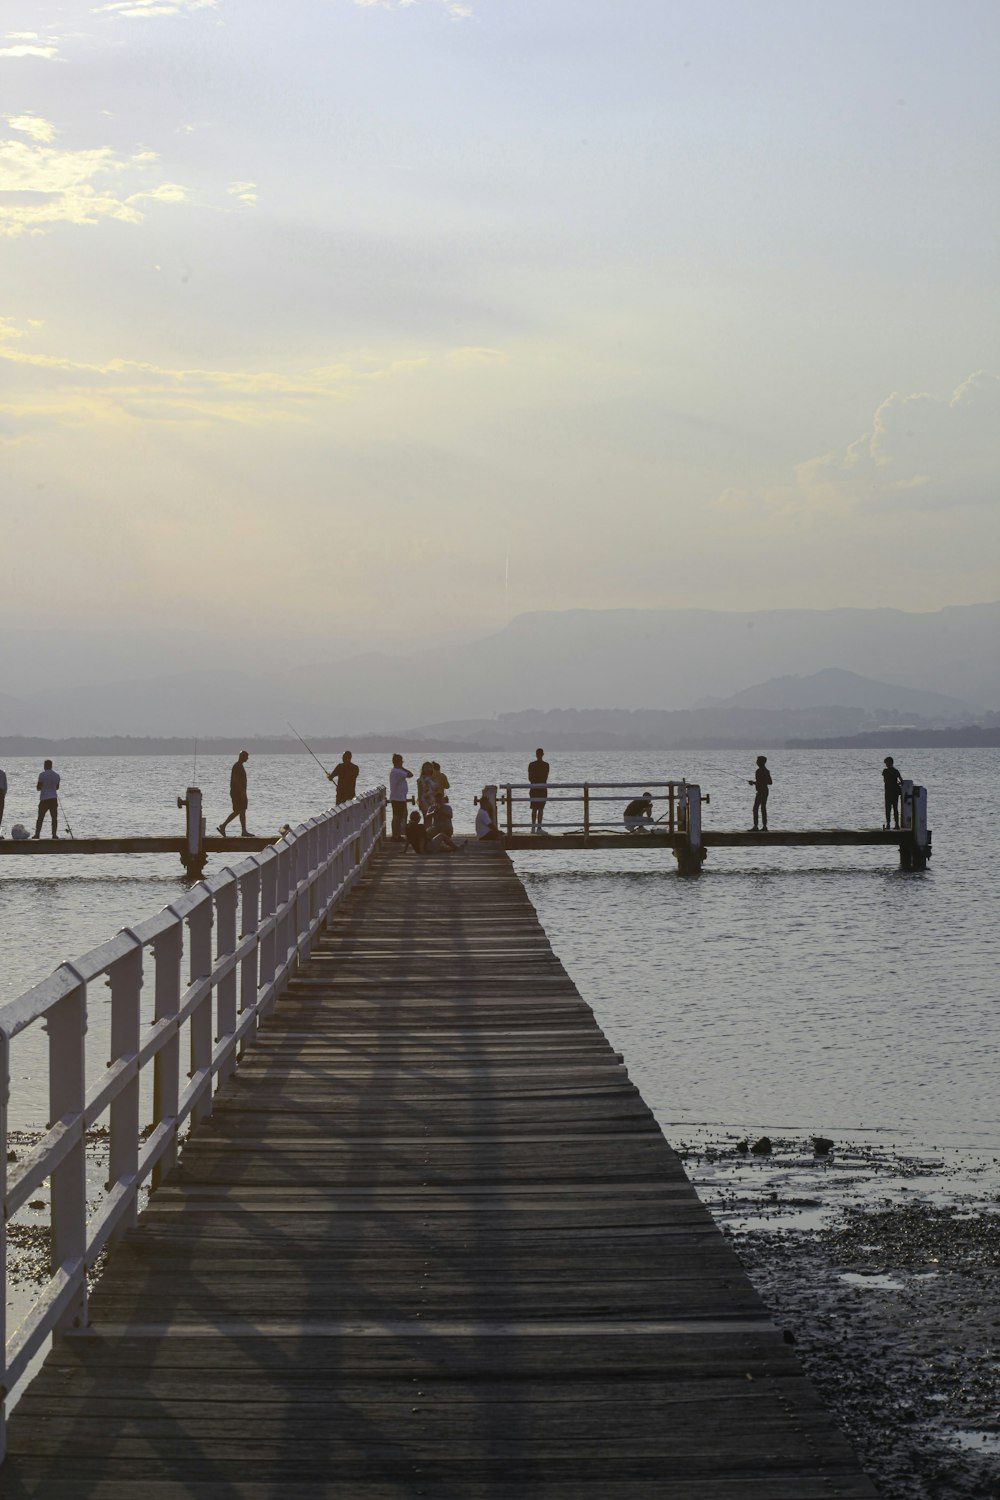 a group of people standing on a pier next to a body of water